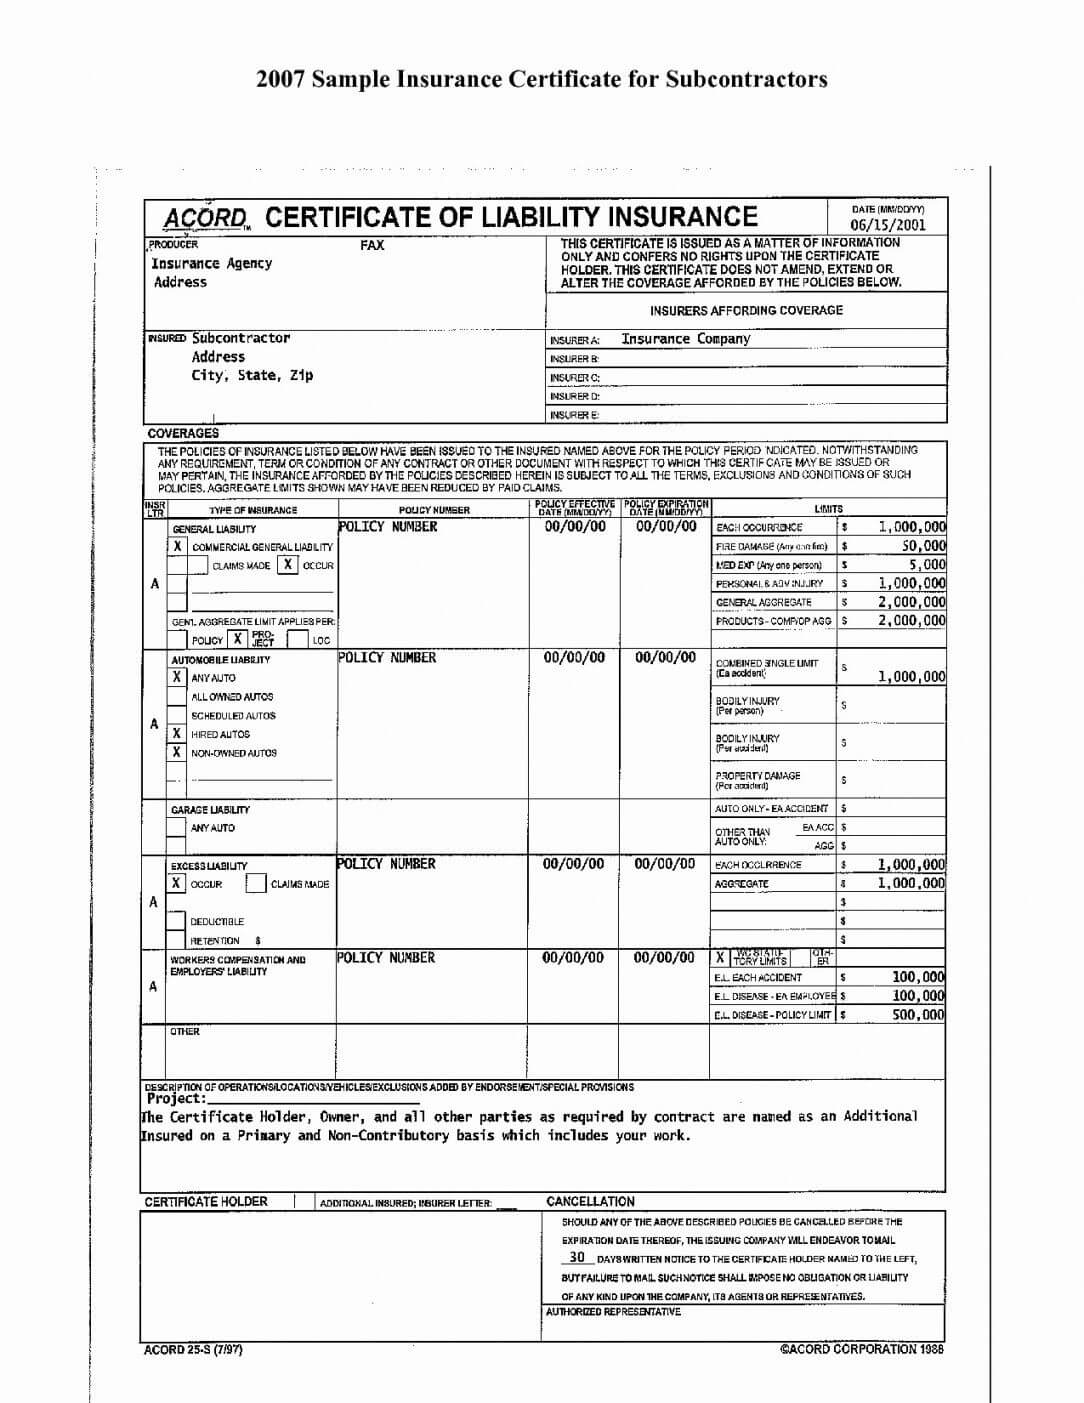 Editable Form Ificate Of Liability Insurance What Is With Regard To